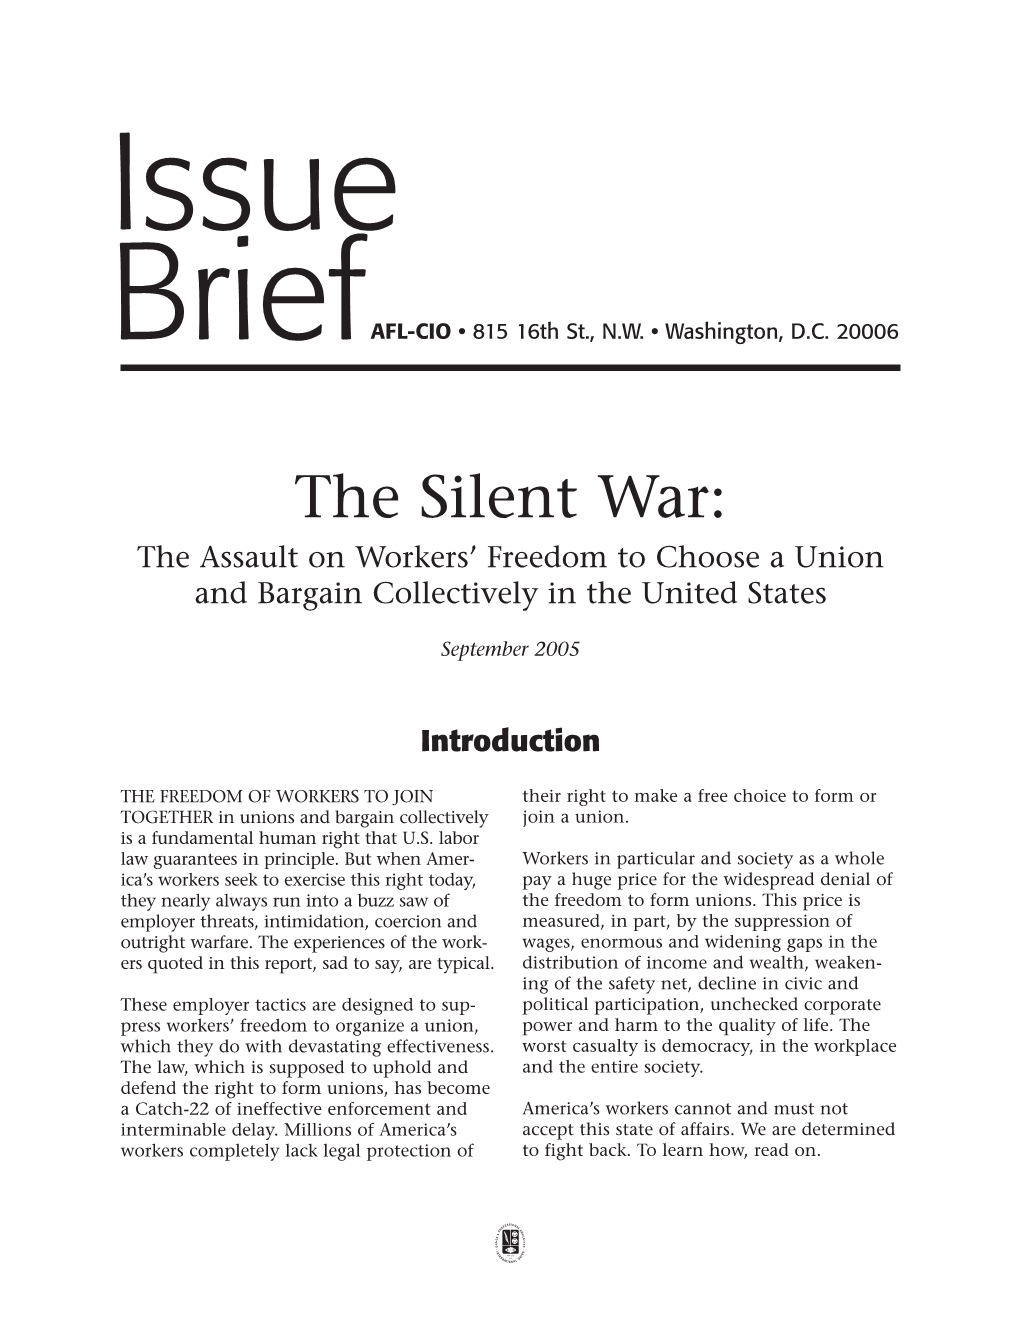 The Silent War: the Assault on Workers’ Freedom to Choose a Union and Bargain Collectively in the United States